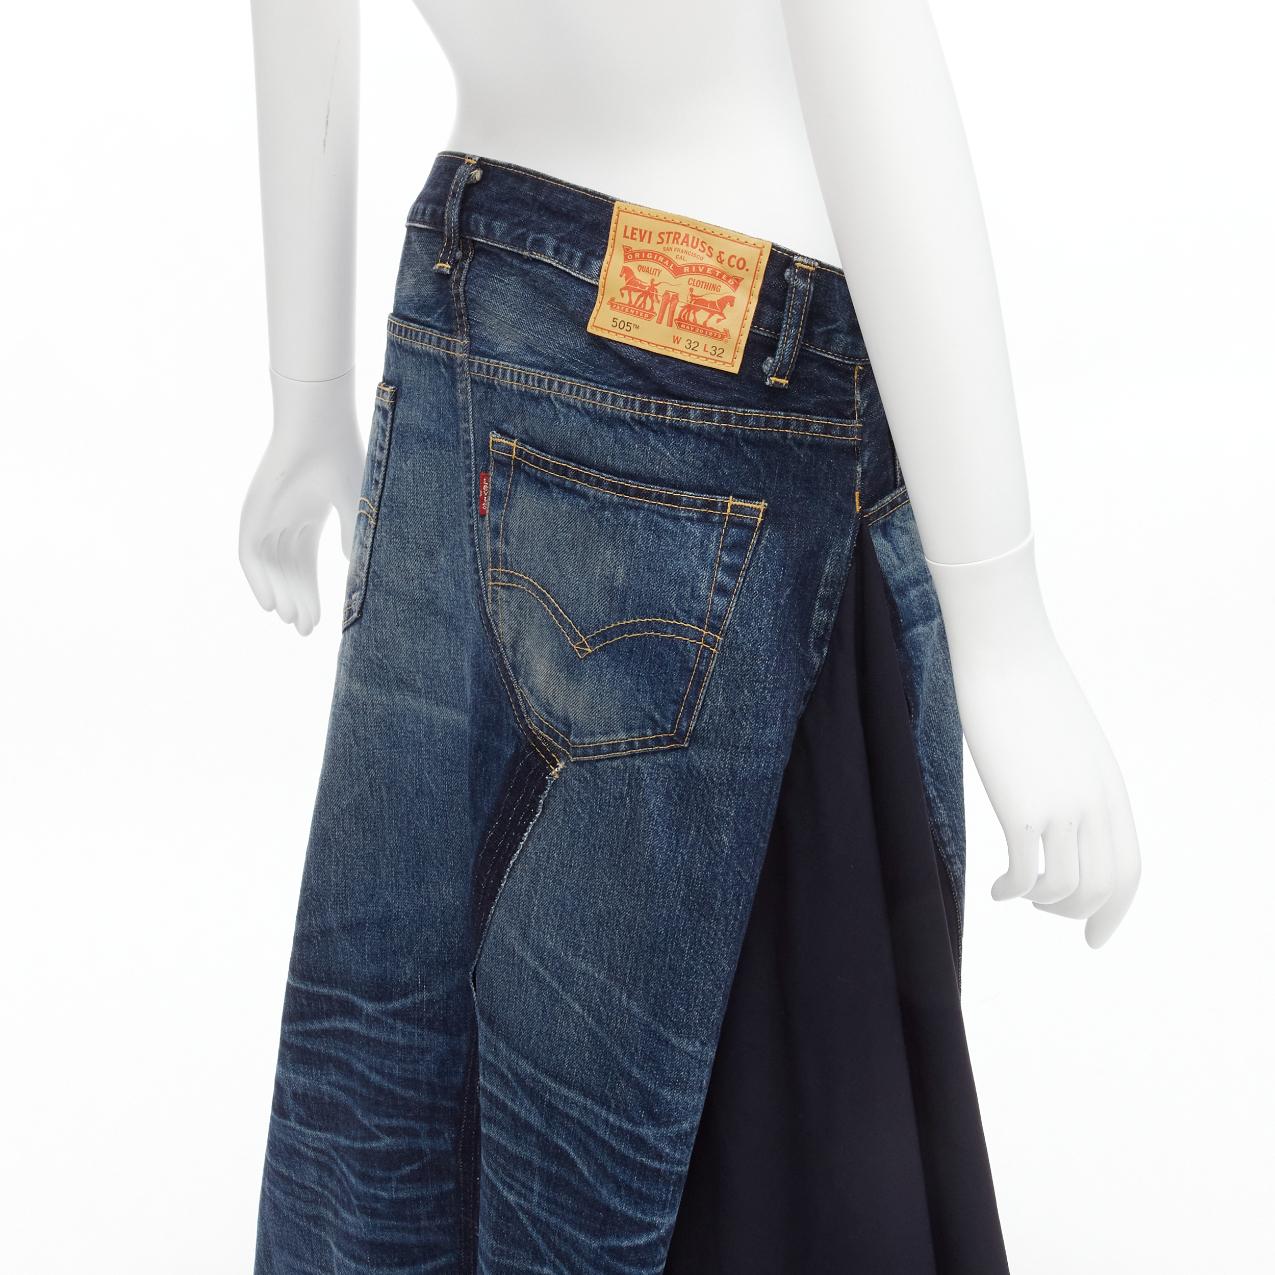 JUNYA WATANABE LEVI'S 2021 blue washed denim navy wool skirt deconstructed shorts S
Reference: TGAS/D00287
Brand: Junya Watanabe
Designer: Junya Watanabe
Collection: 2021 Levi's
Material: Denim, Wool, Blend
Color: Blue, Navy
Pattern: Solid
Closure: